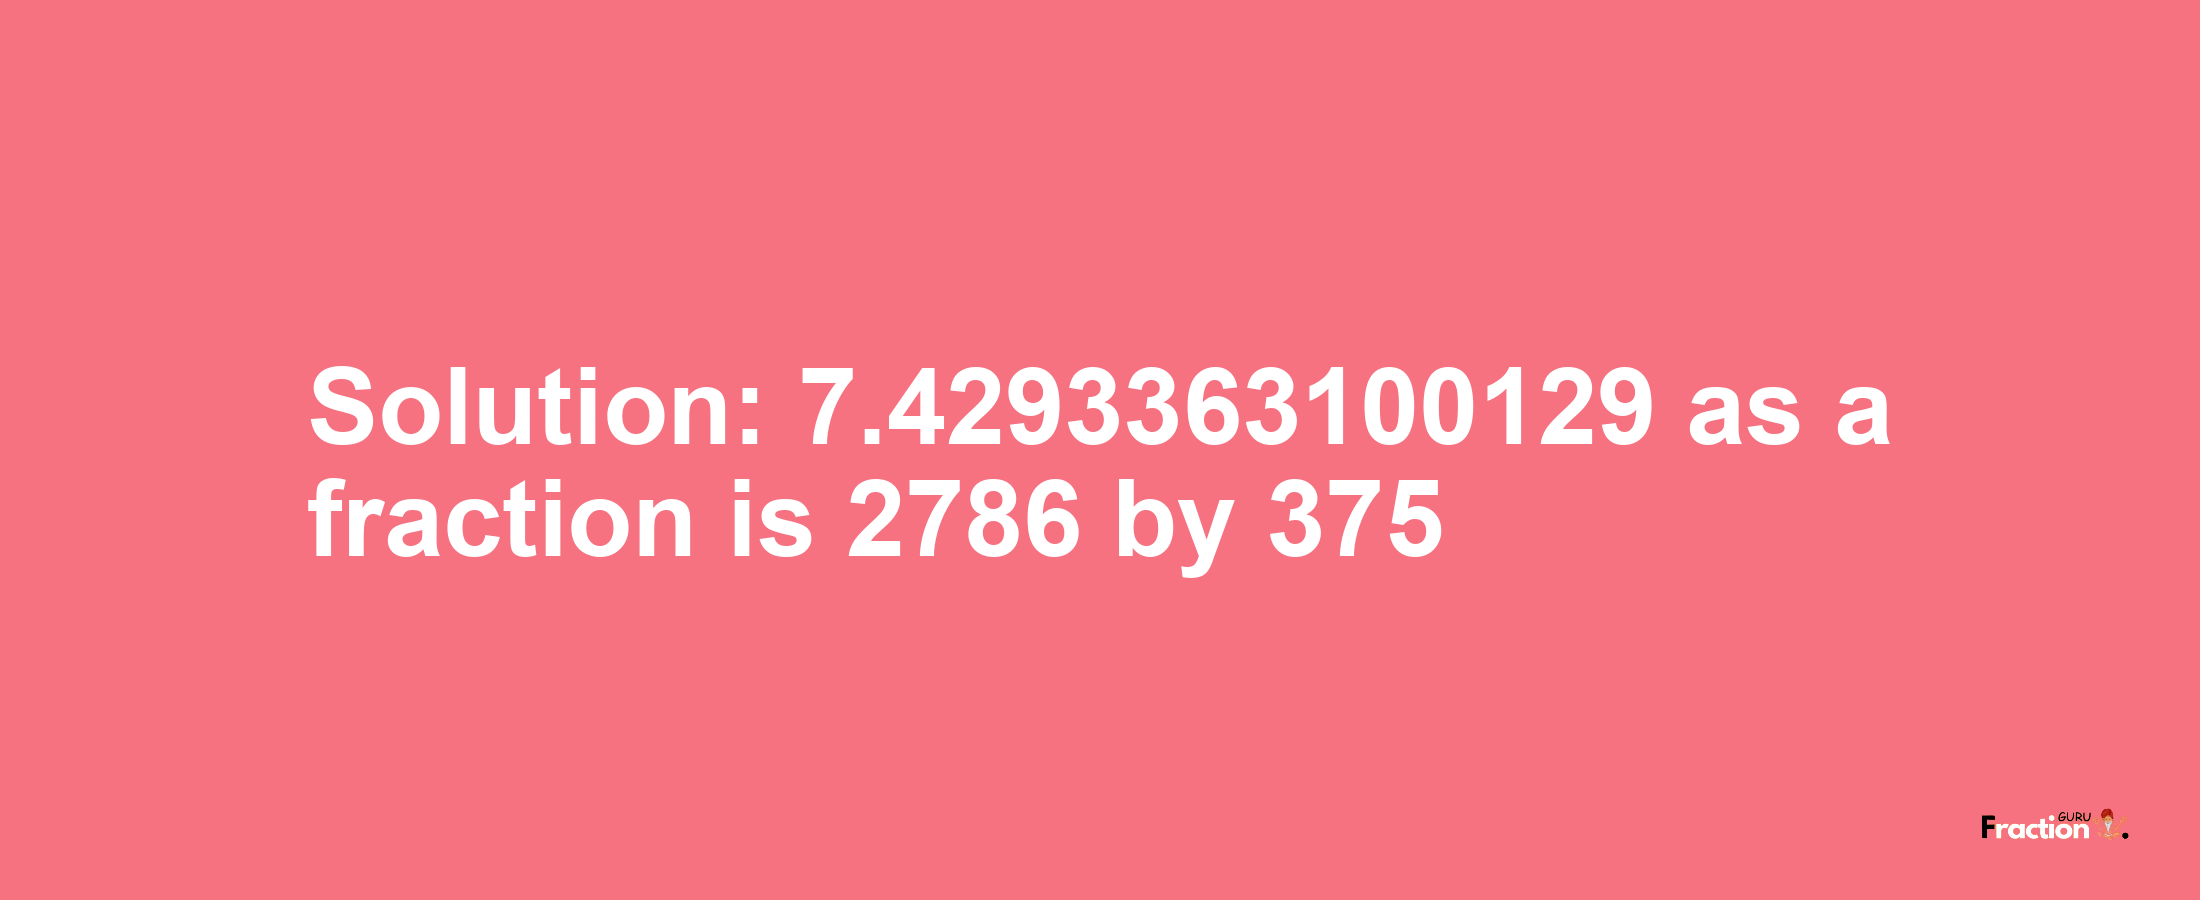 Solution:7.4293363100129 as a fraction is 2786/375